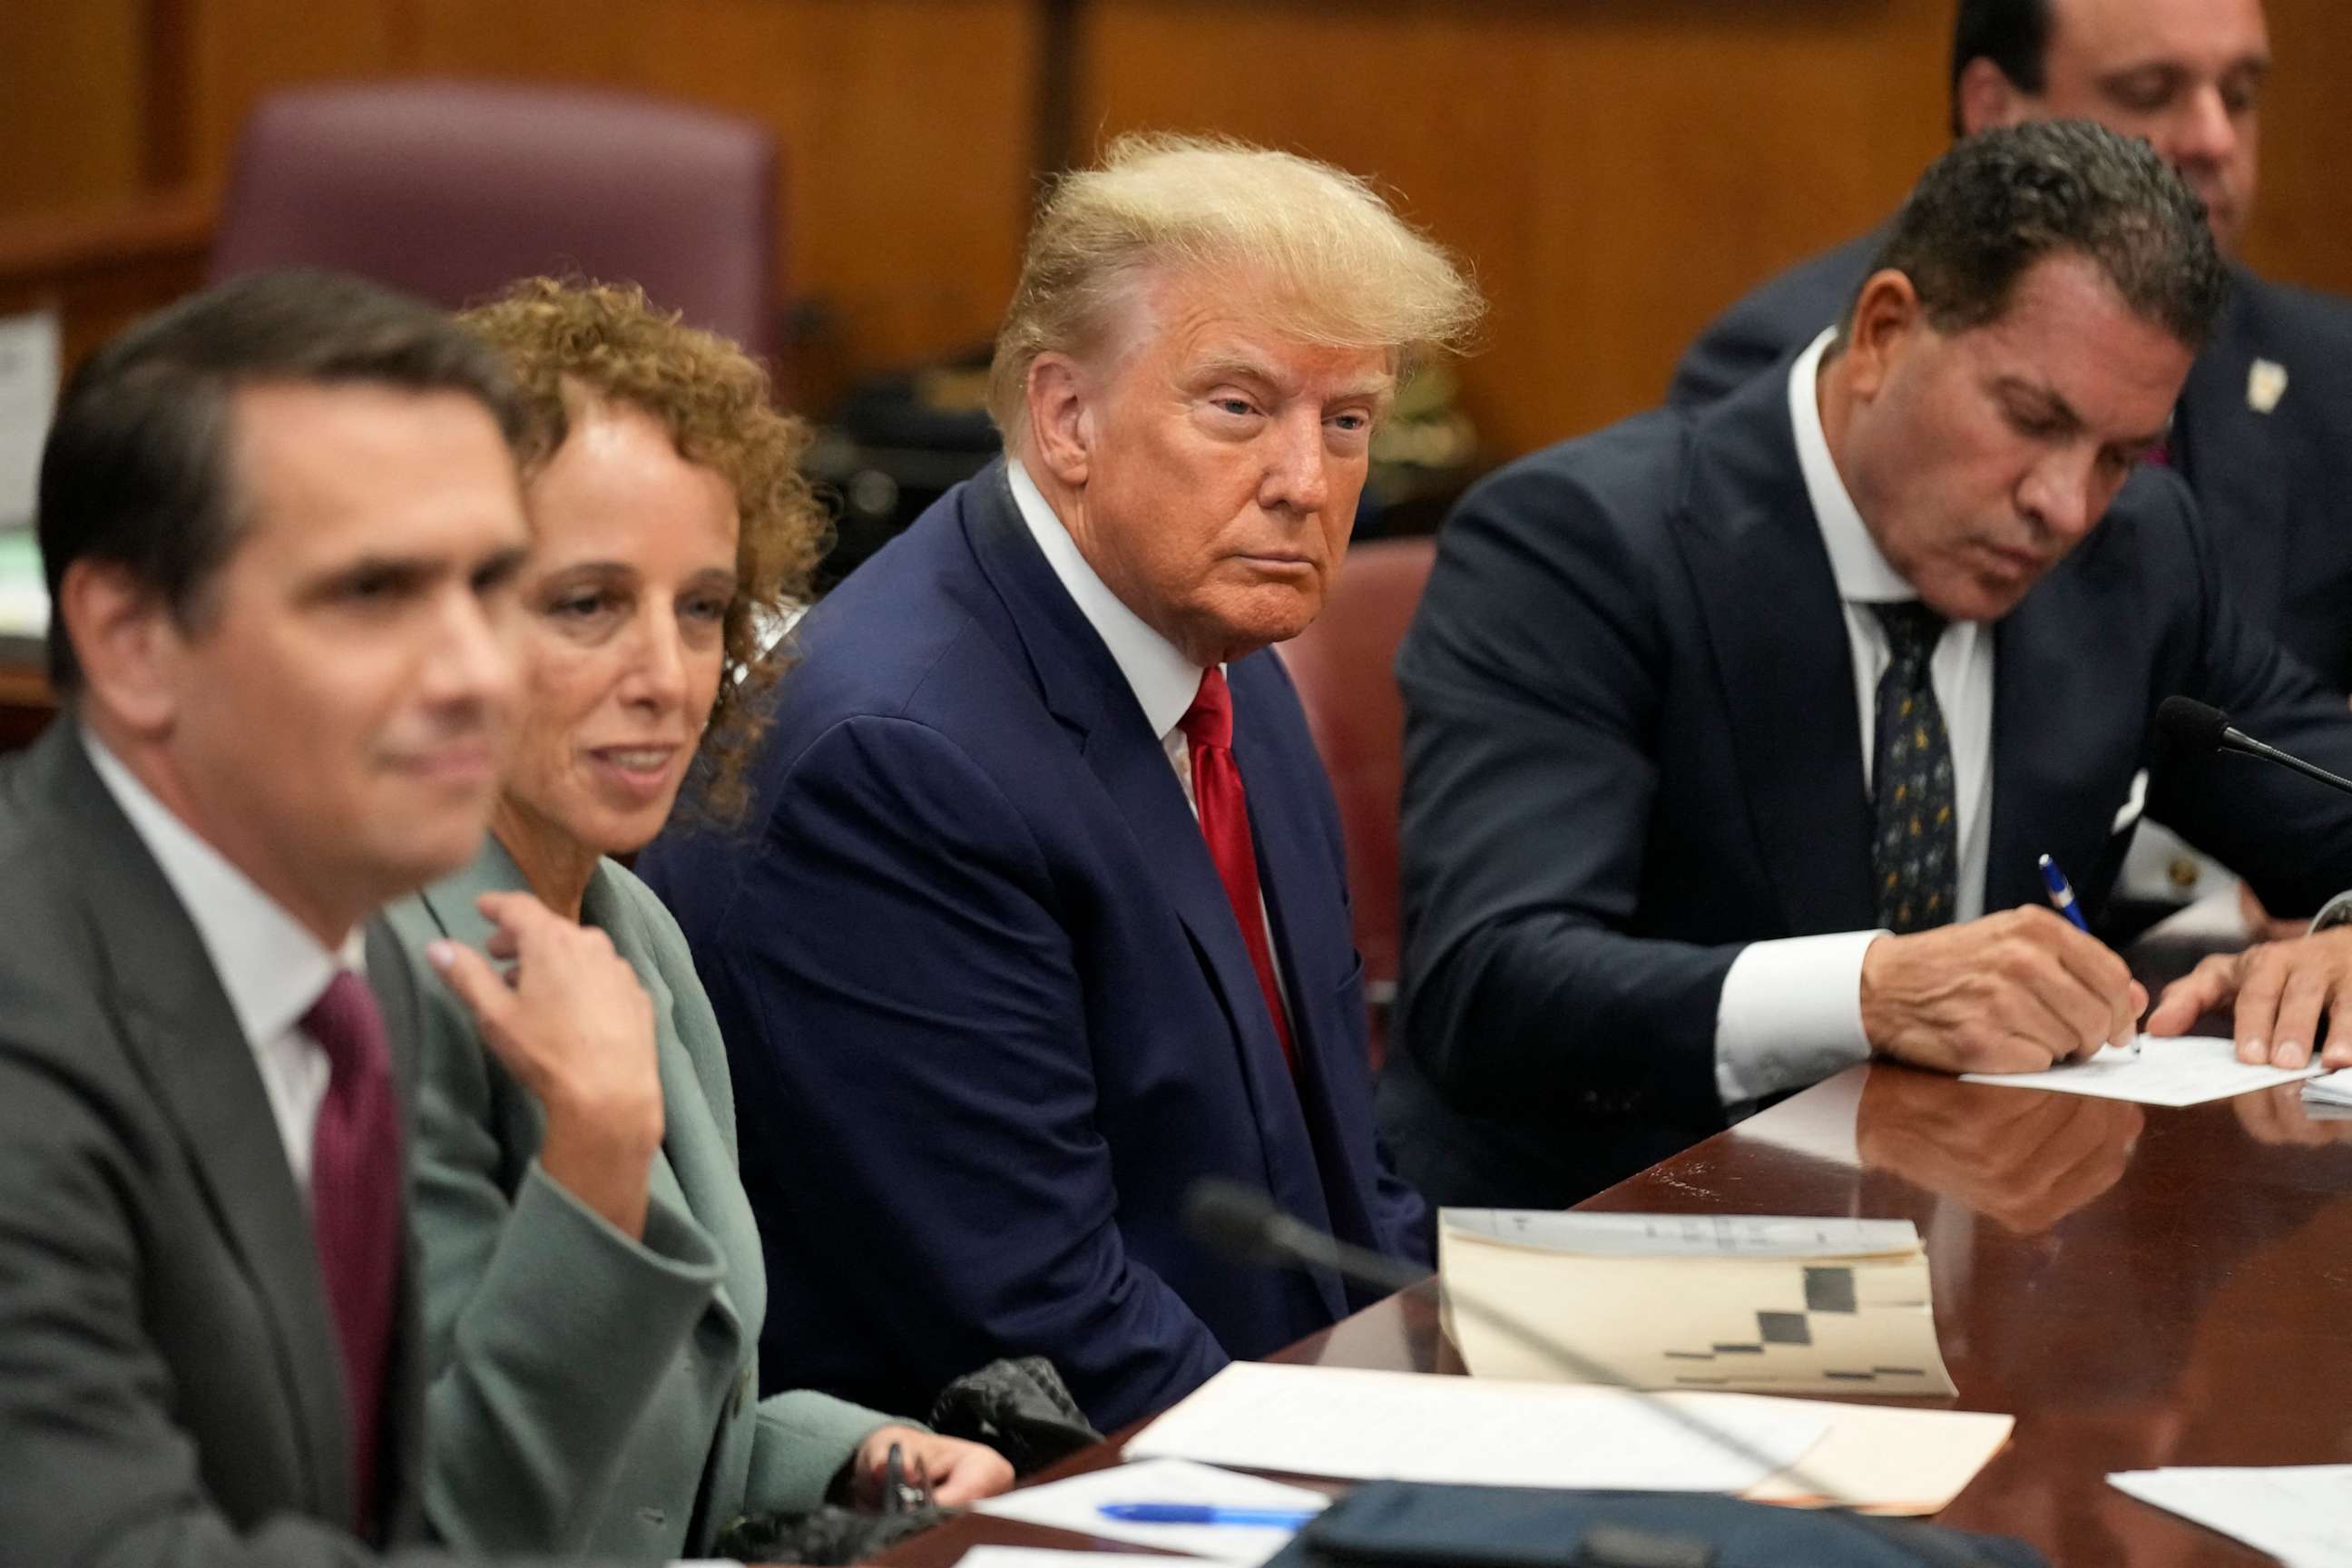 PHOTO: Former President Donald Trump appears in court for an arraignment on charges stemming from his indictment by a Manhattan grand jury following a probe into hush money paid to porn star Stormy Daniels, in New York City, Apr. 4, 2023.